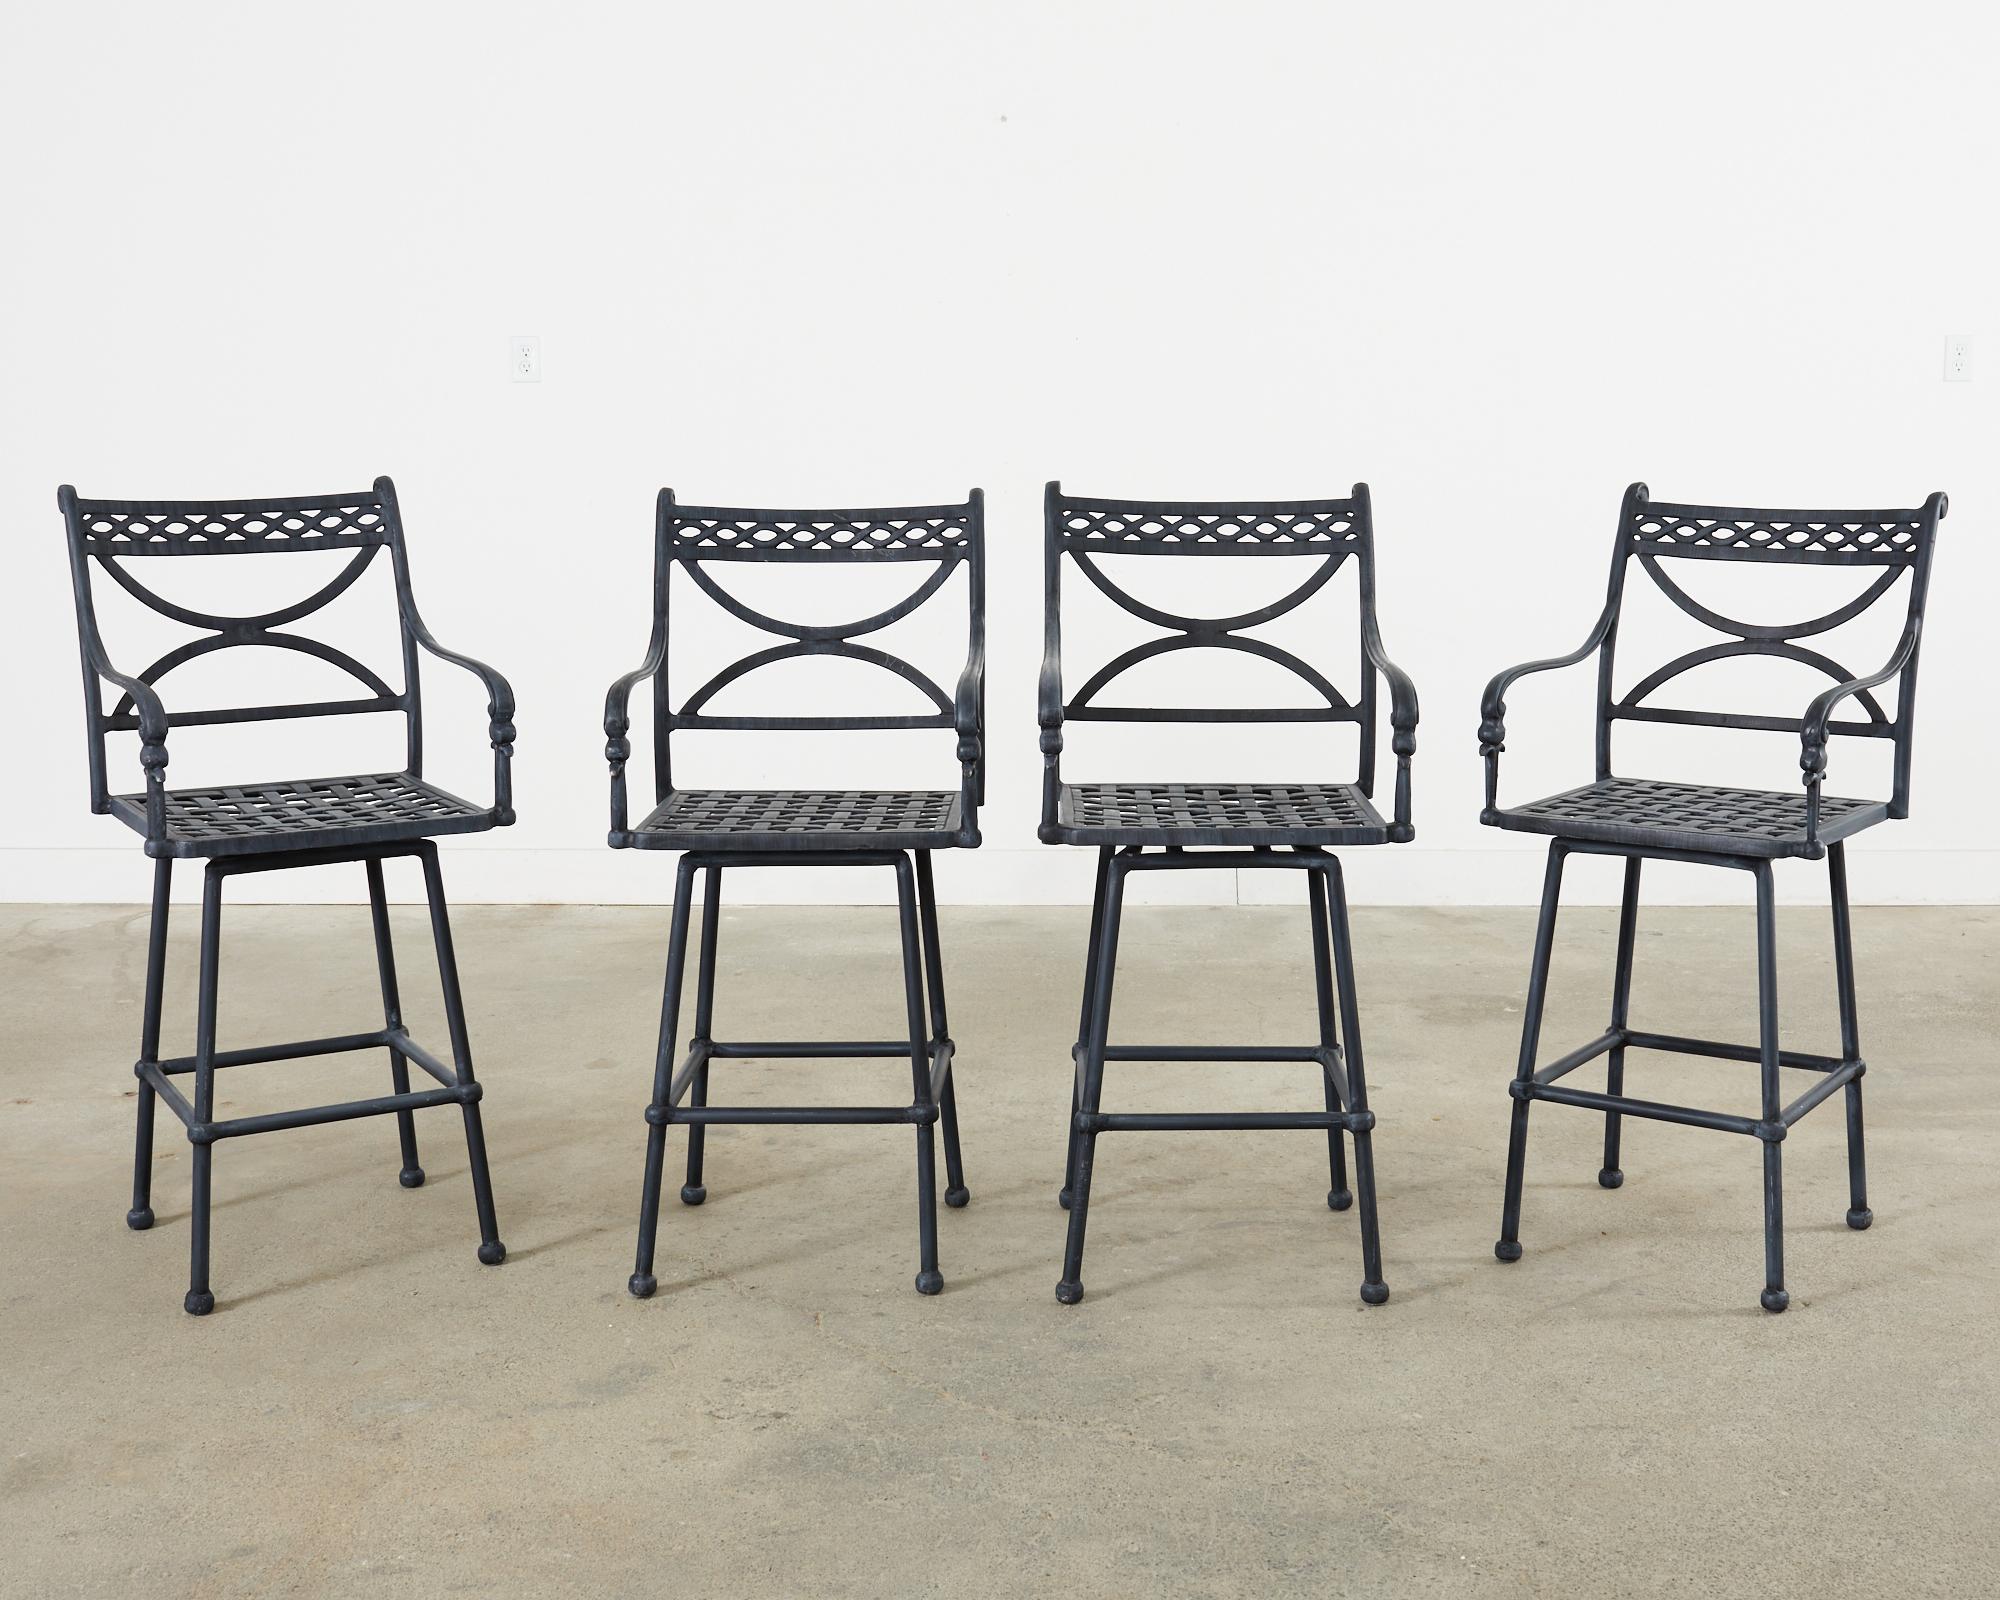 Extraordinary set of four patio and garden swivel bar height barstools constructed from cast aluminum. The stools feature an intentionally aged and faded patina on the soft finish. The backs have a scrolled top and a large x form back splat centered